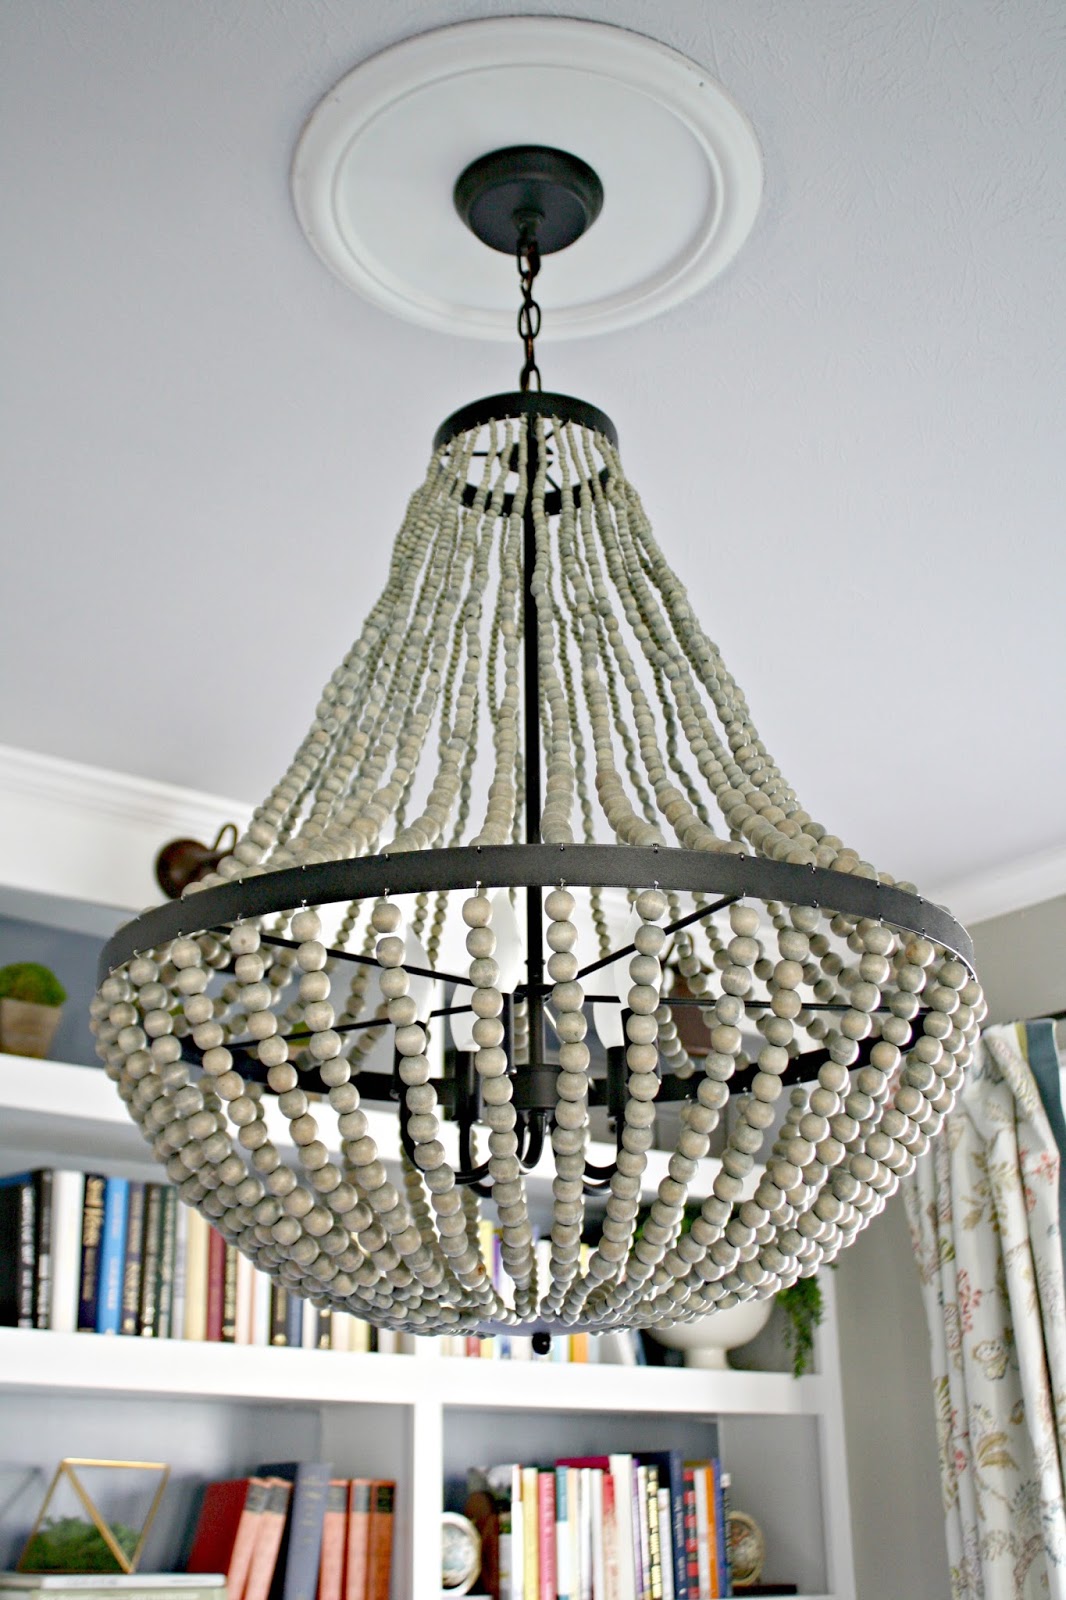 A New Beaded Chandelier from Thrifty Decor Chick